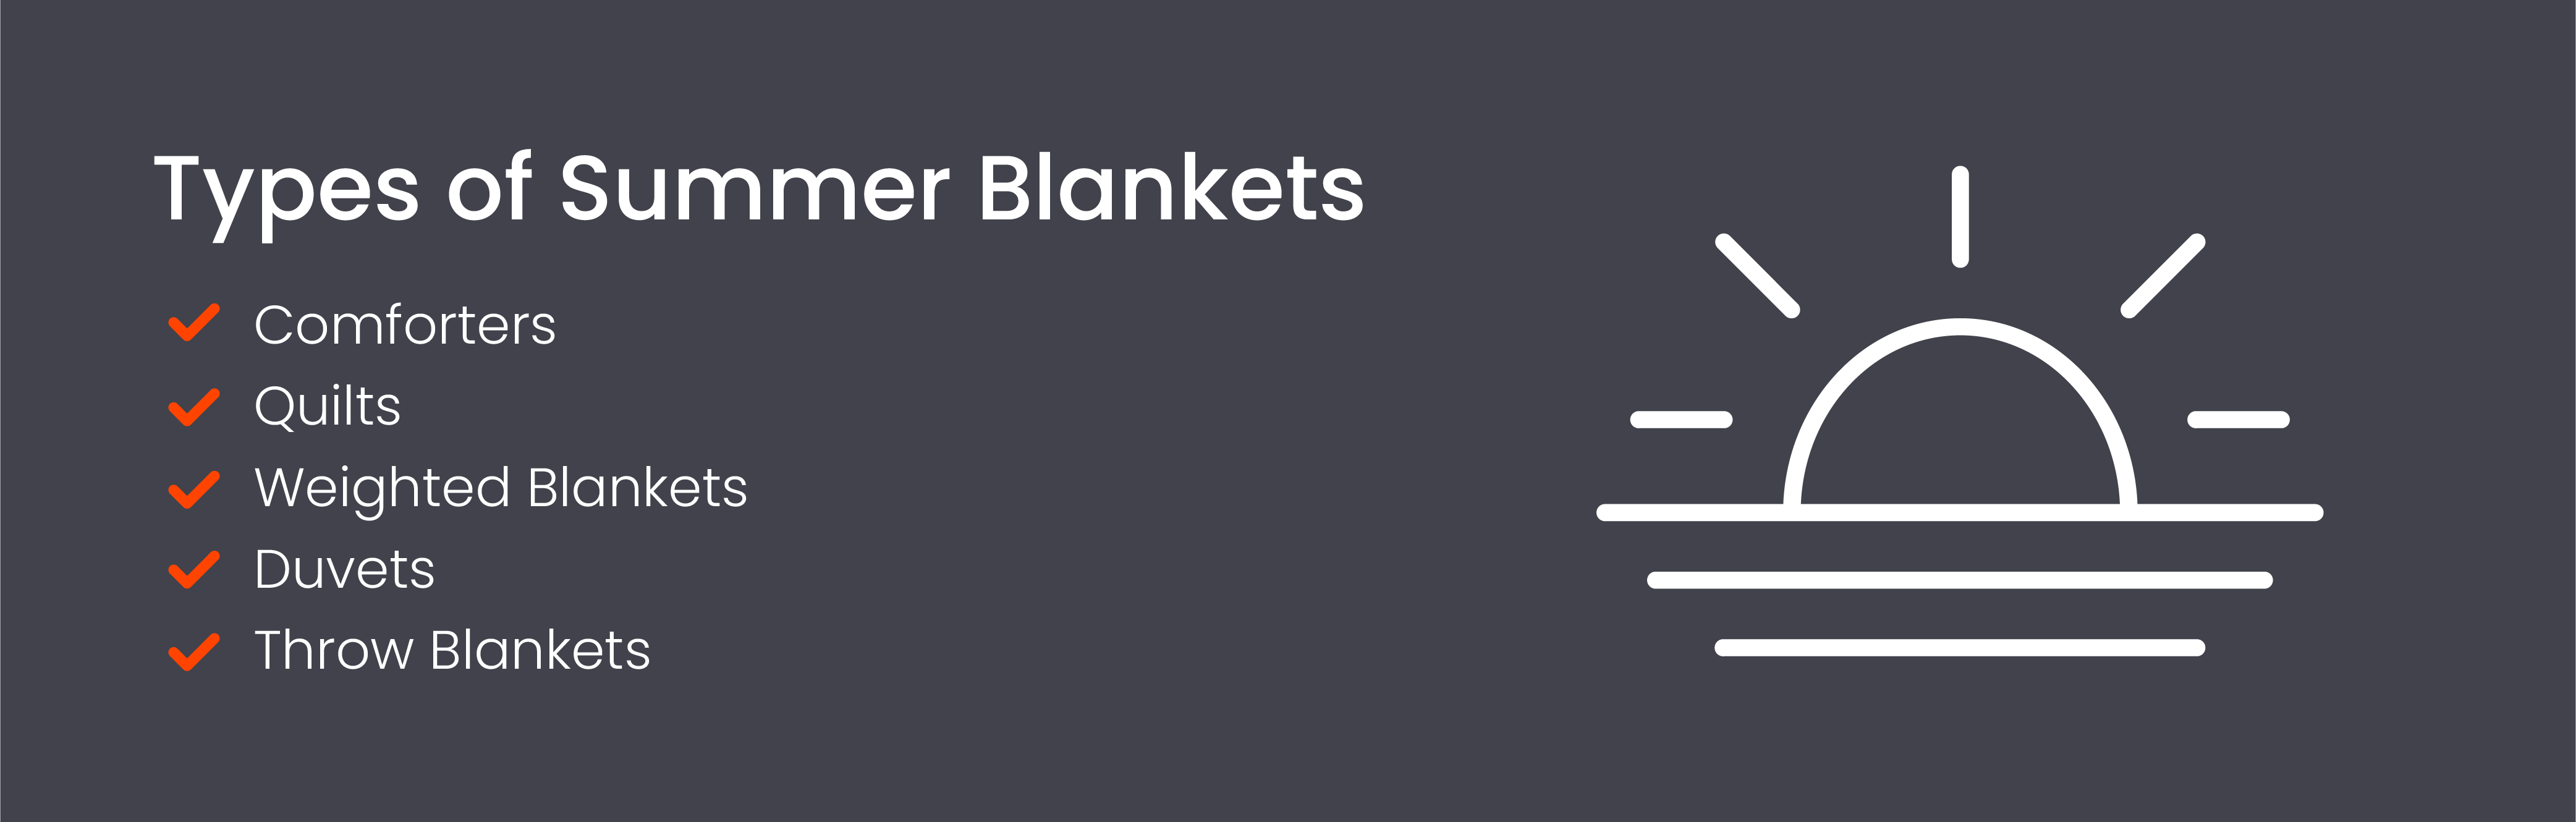 Types of summer blankets